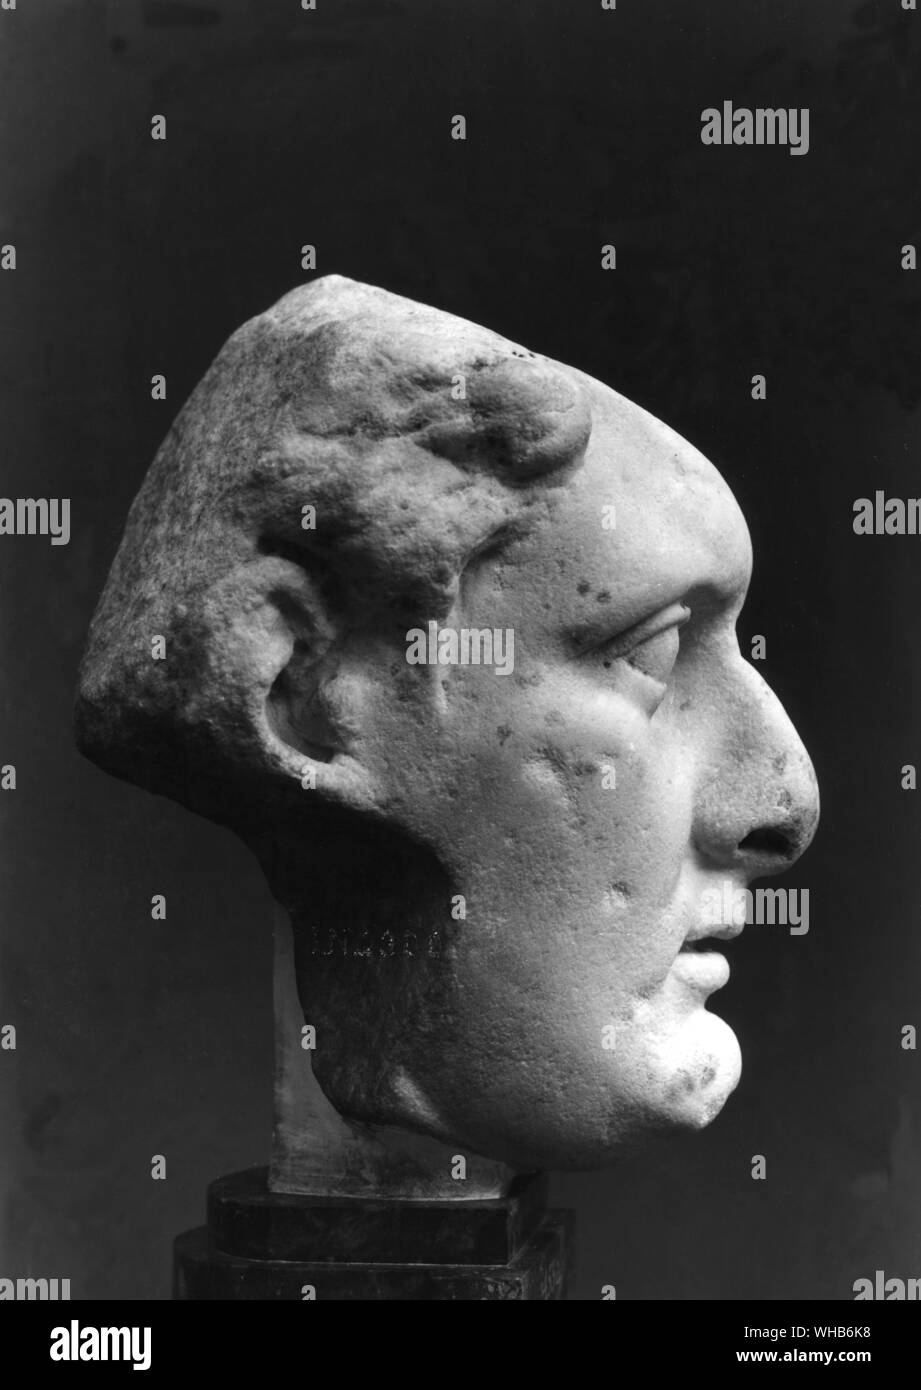 Ptolemy I Soter (Greek: Ptolemaios Soter, i.e. Ptolemy the Savior, 367 BC - 283 BC) was a Macedonian general who became the ruler of Egypt (323 BC - 283 BC) and founder of the Ptolemaic dynasty. In 305 BC he took the title of king. He was the son of Arsinoe of Macedonia - either by her husband Lagus, a Macedonian nobleman, or by her lover, Philip II of Macedon (which would make him the half-brother of Alexander the Great if true). Ptolemy was one of Alexander the Great's most trusted generals, and among the seven body-guards attached to his person. He was a few years older than Alexander, and Stock Photo